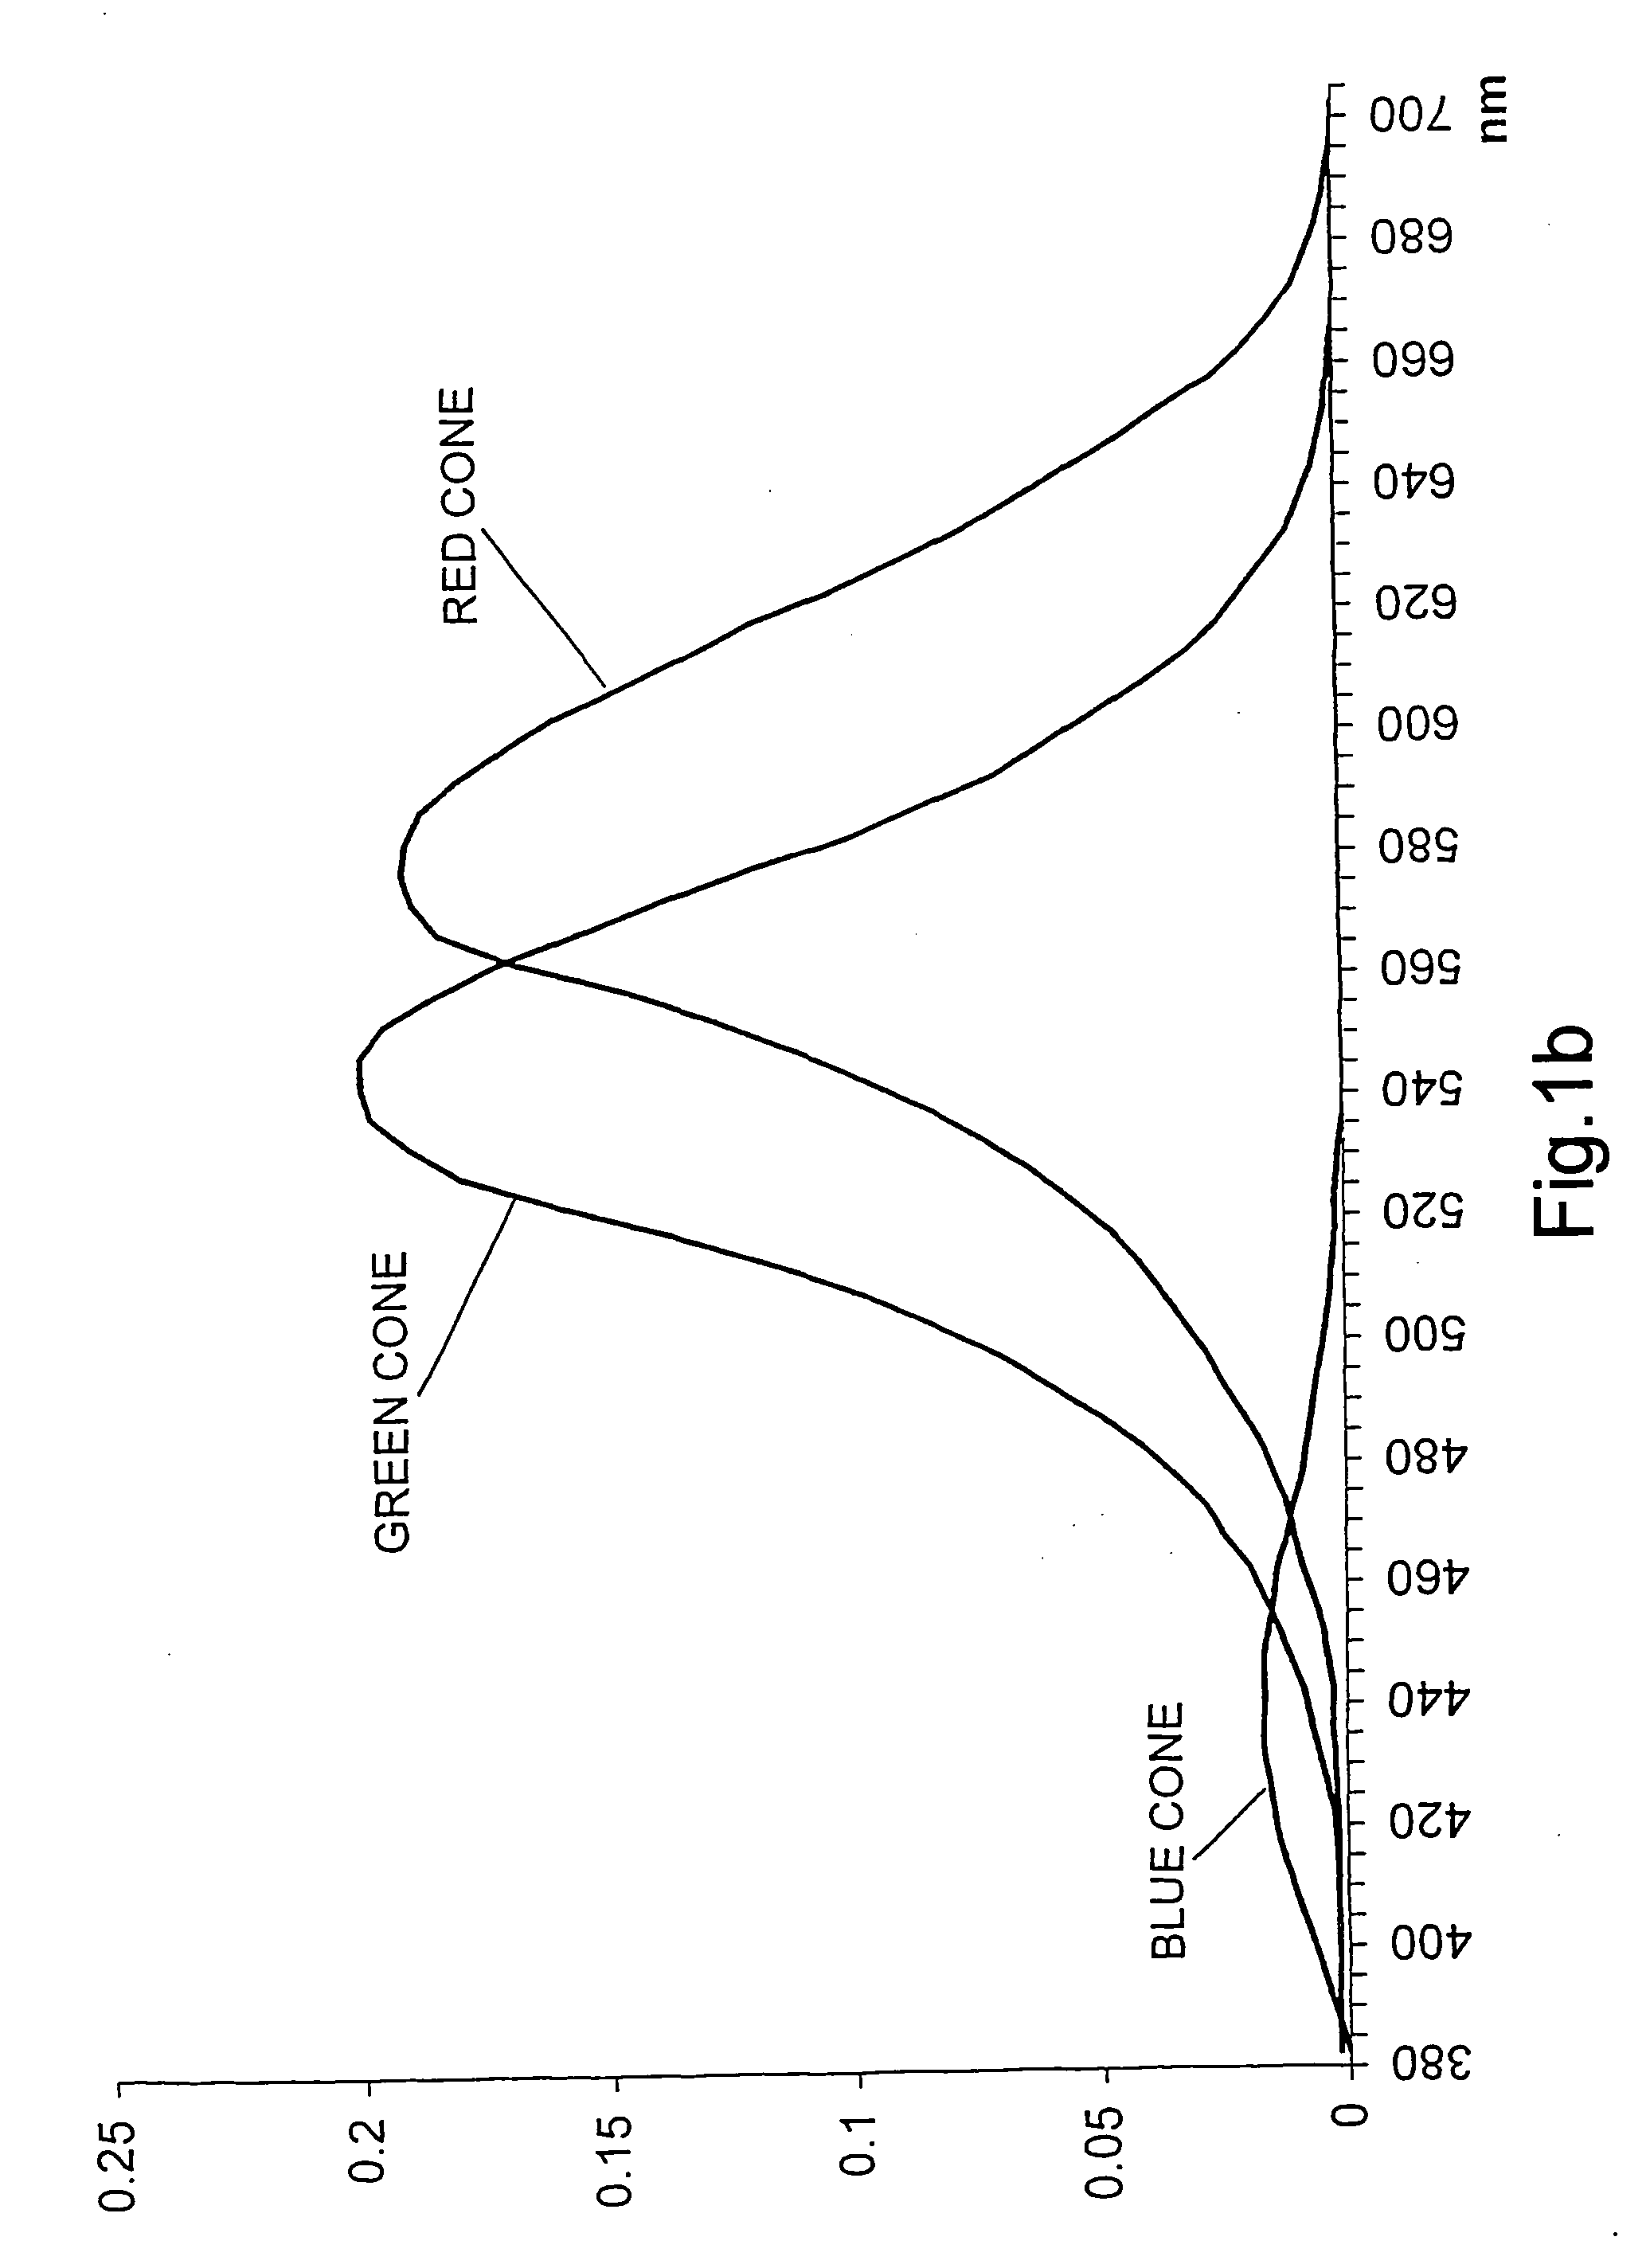 Apparatus and method for application of tinted light and concurrent assessment of performance